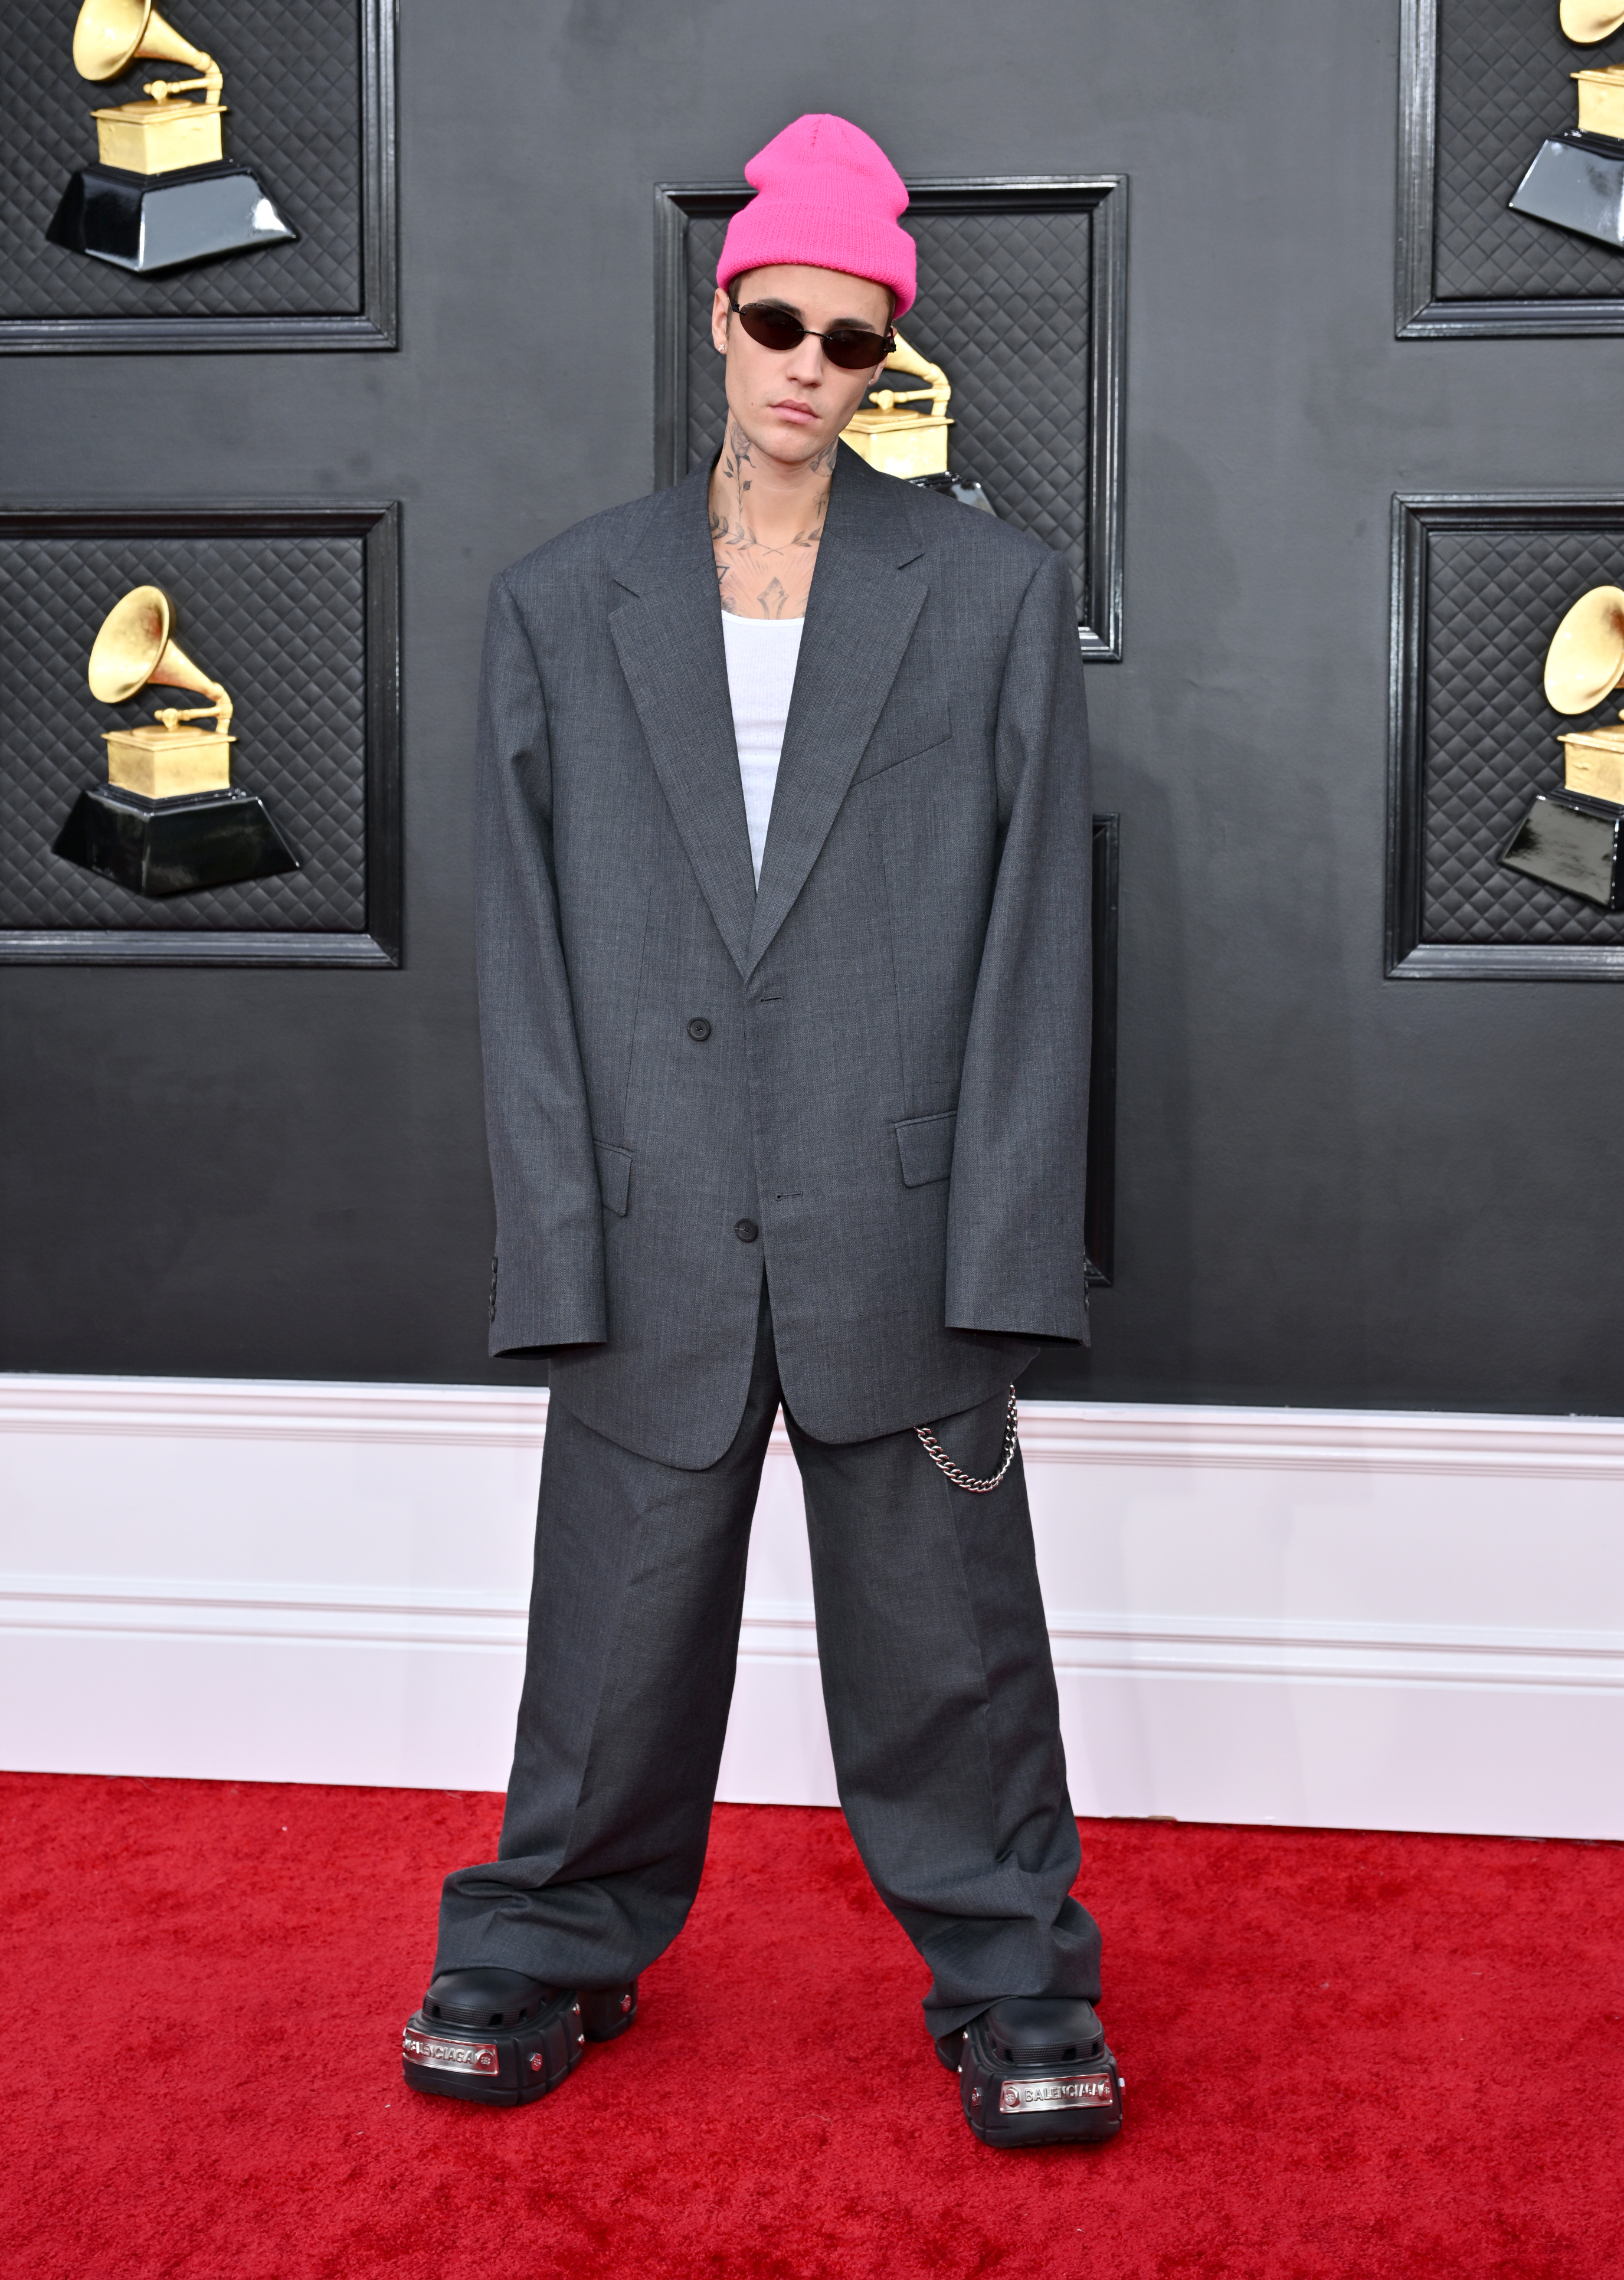 Justin Bieber on the Grammys red carpet in an oversized suit and a beanie